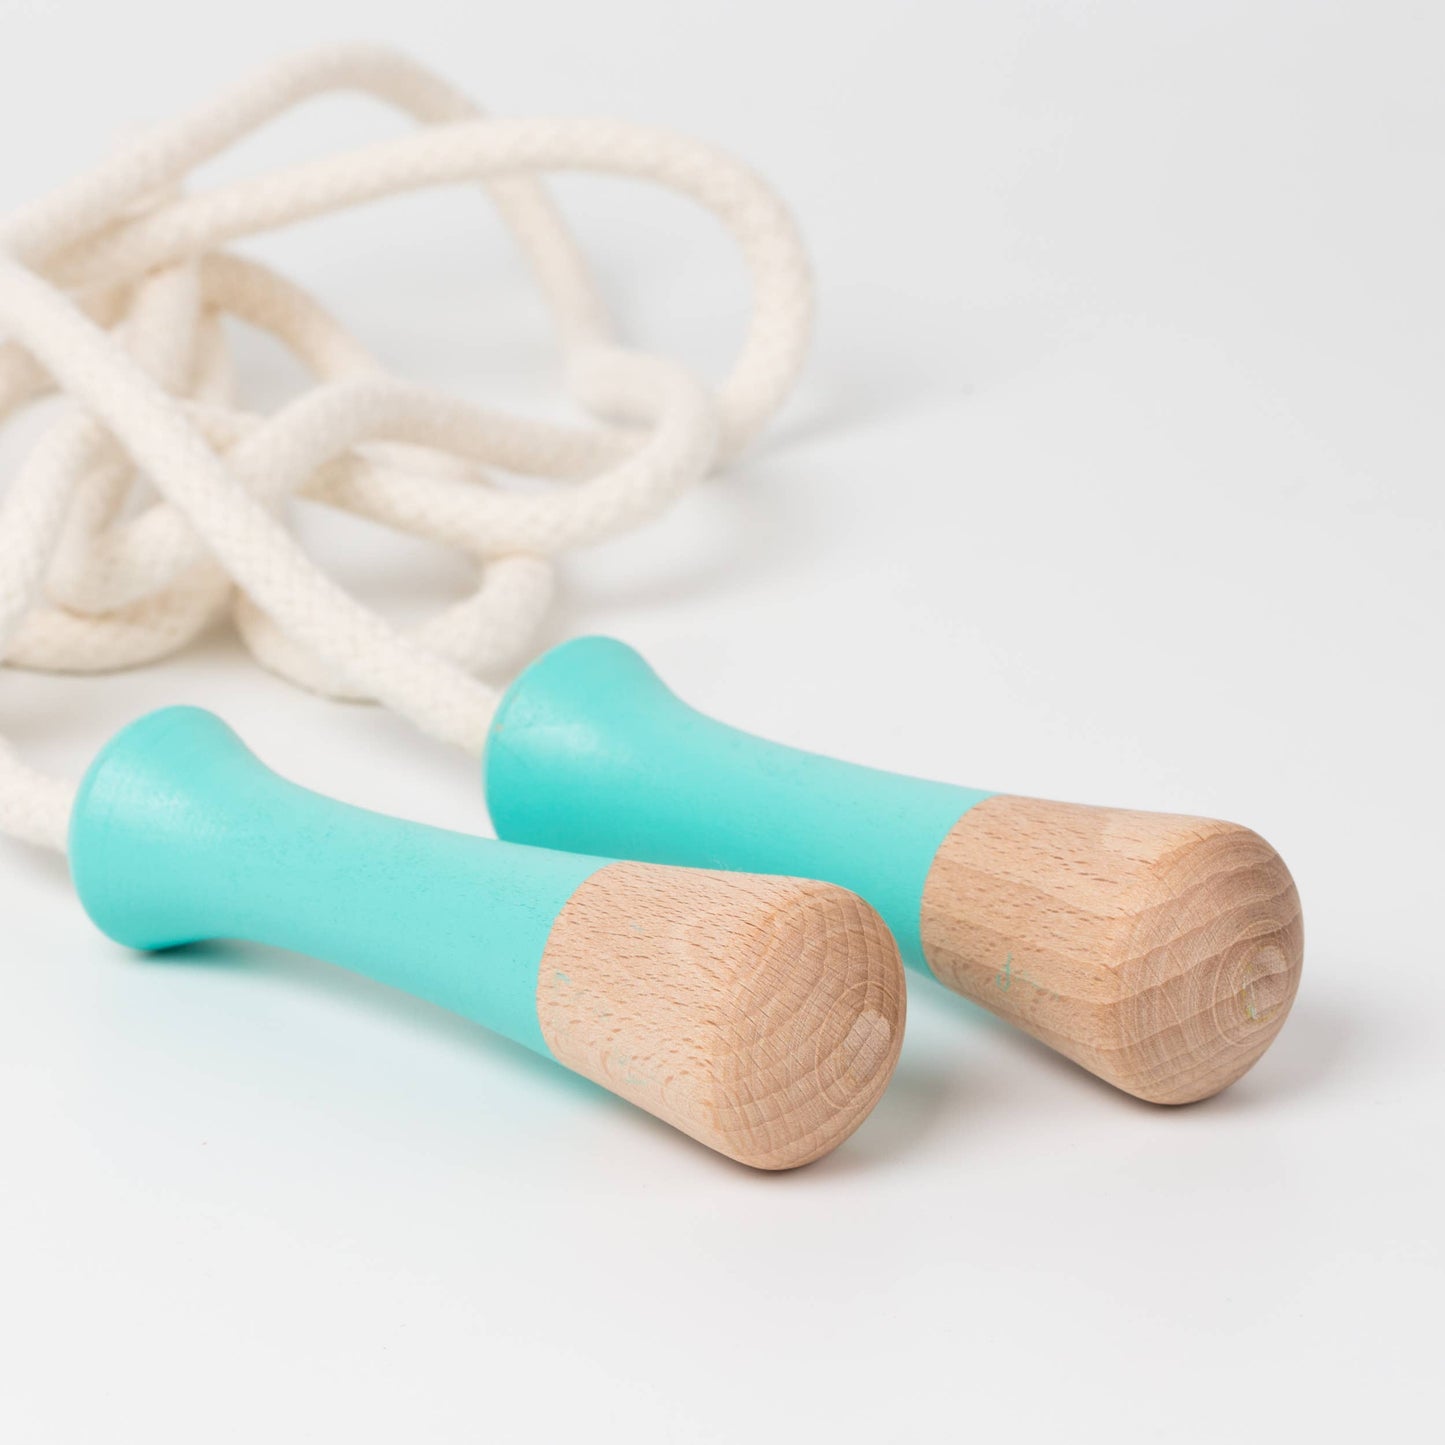 Eco-friendly and durable fitness accessory, perfect for a sustainable and fun workout